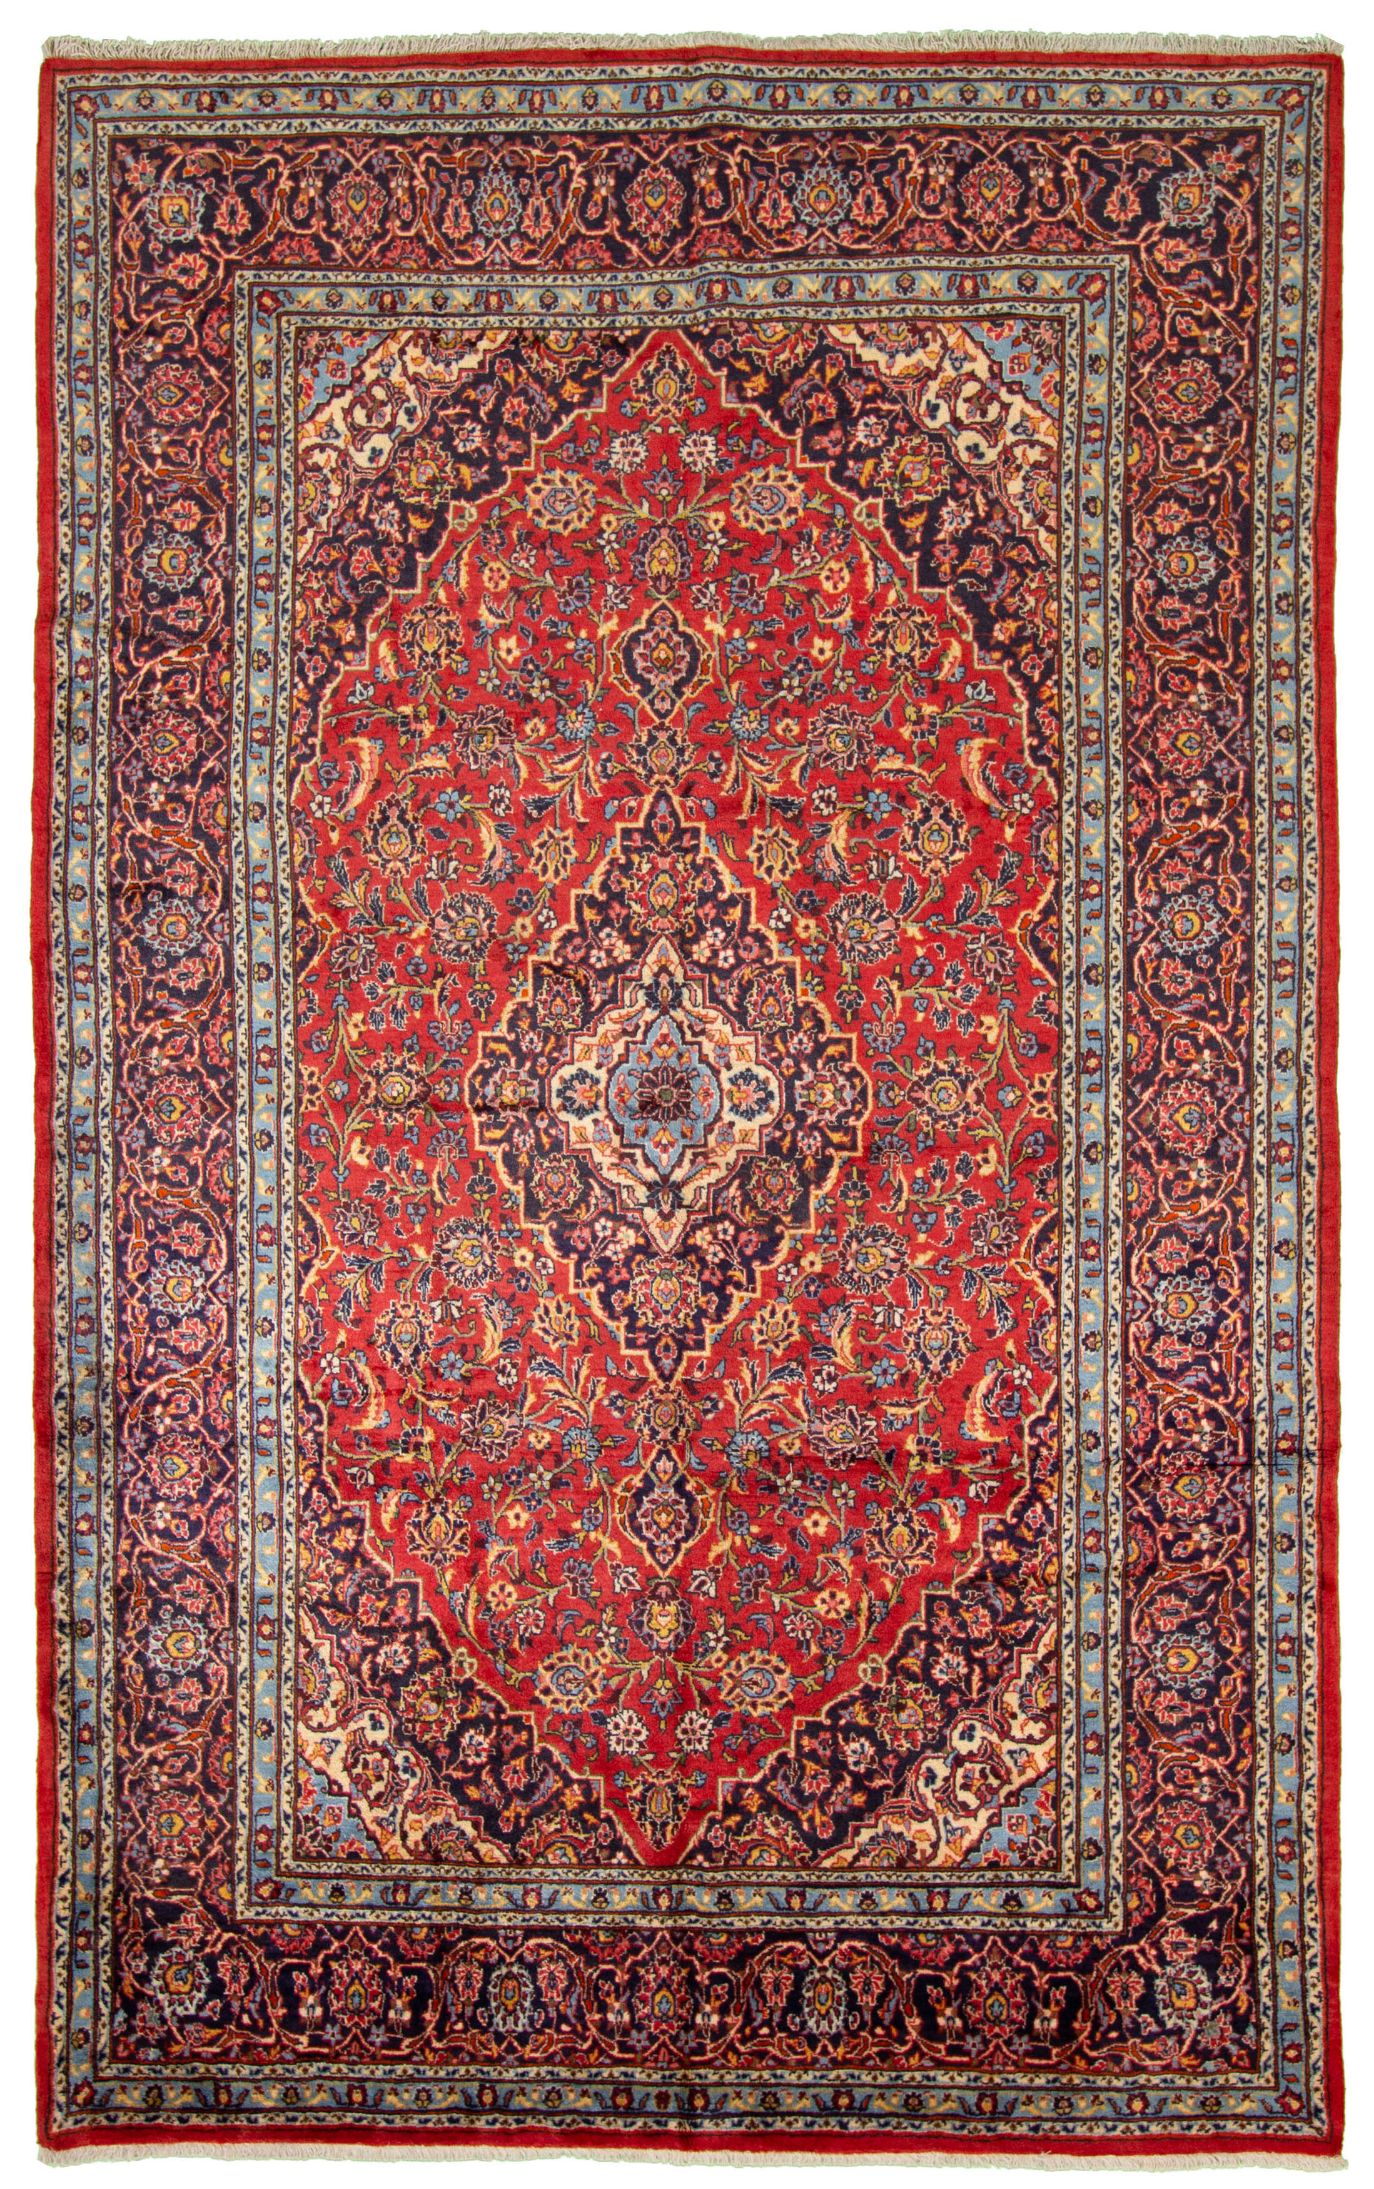 Hand-knotted Kashan  Wool Rug 6'8" x 10'10" Size: 6'8" x 10'10"  